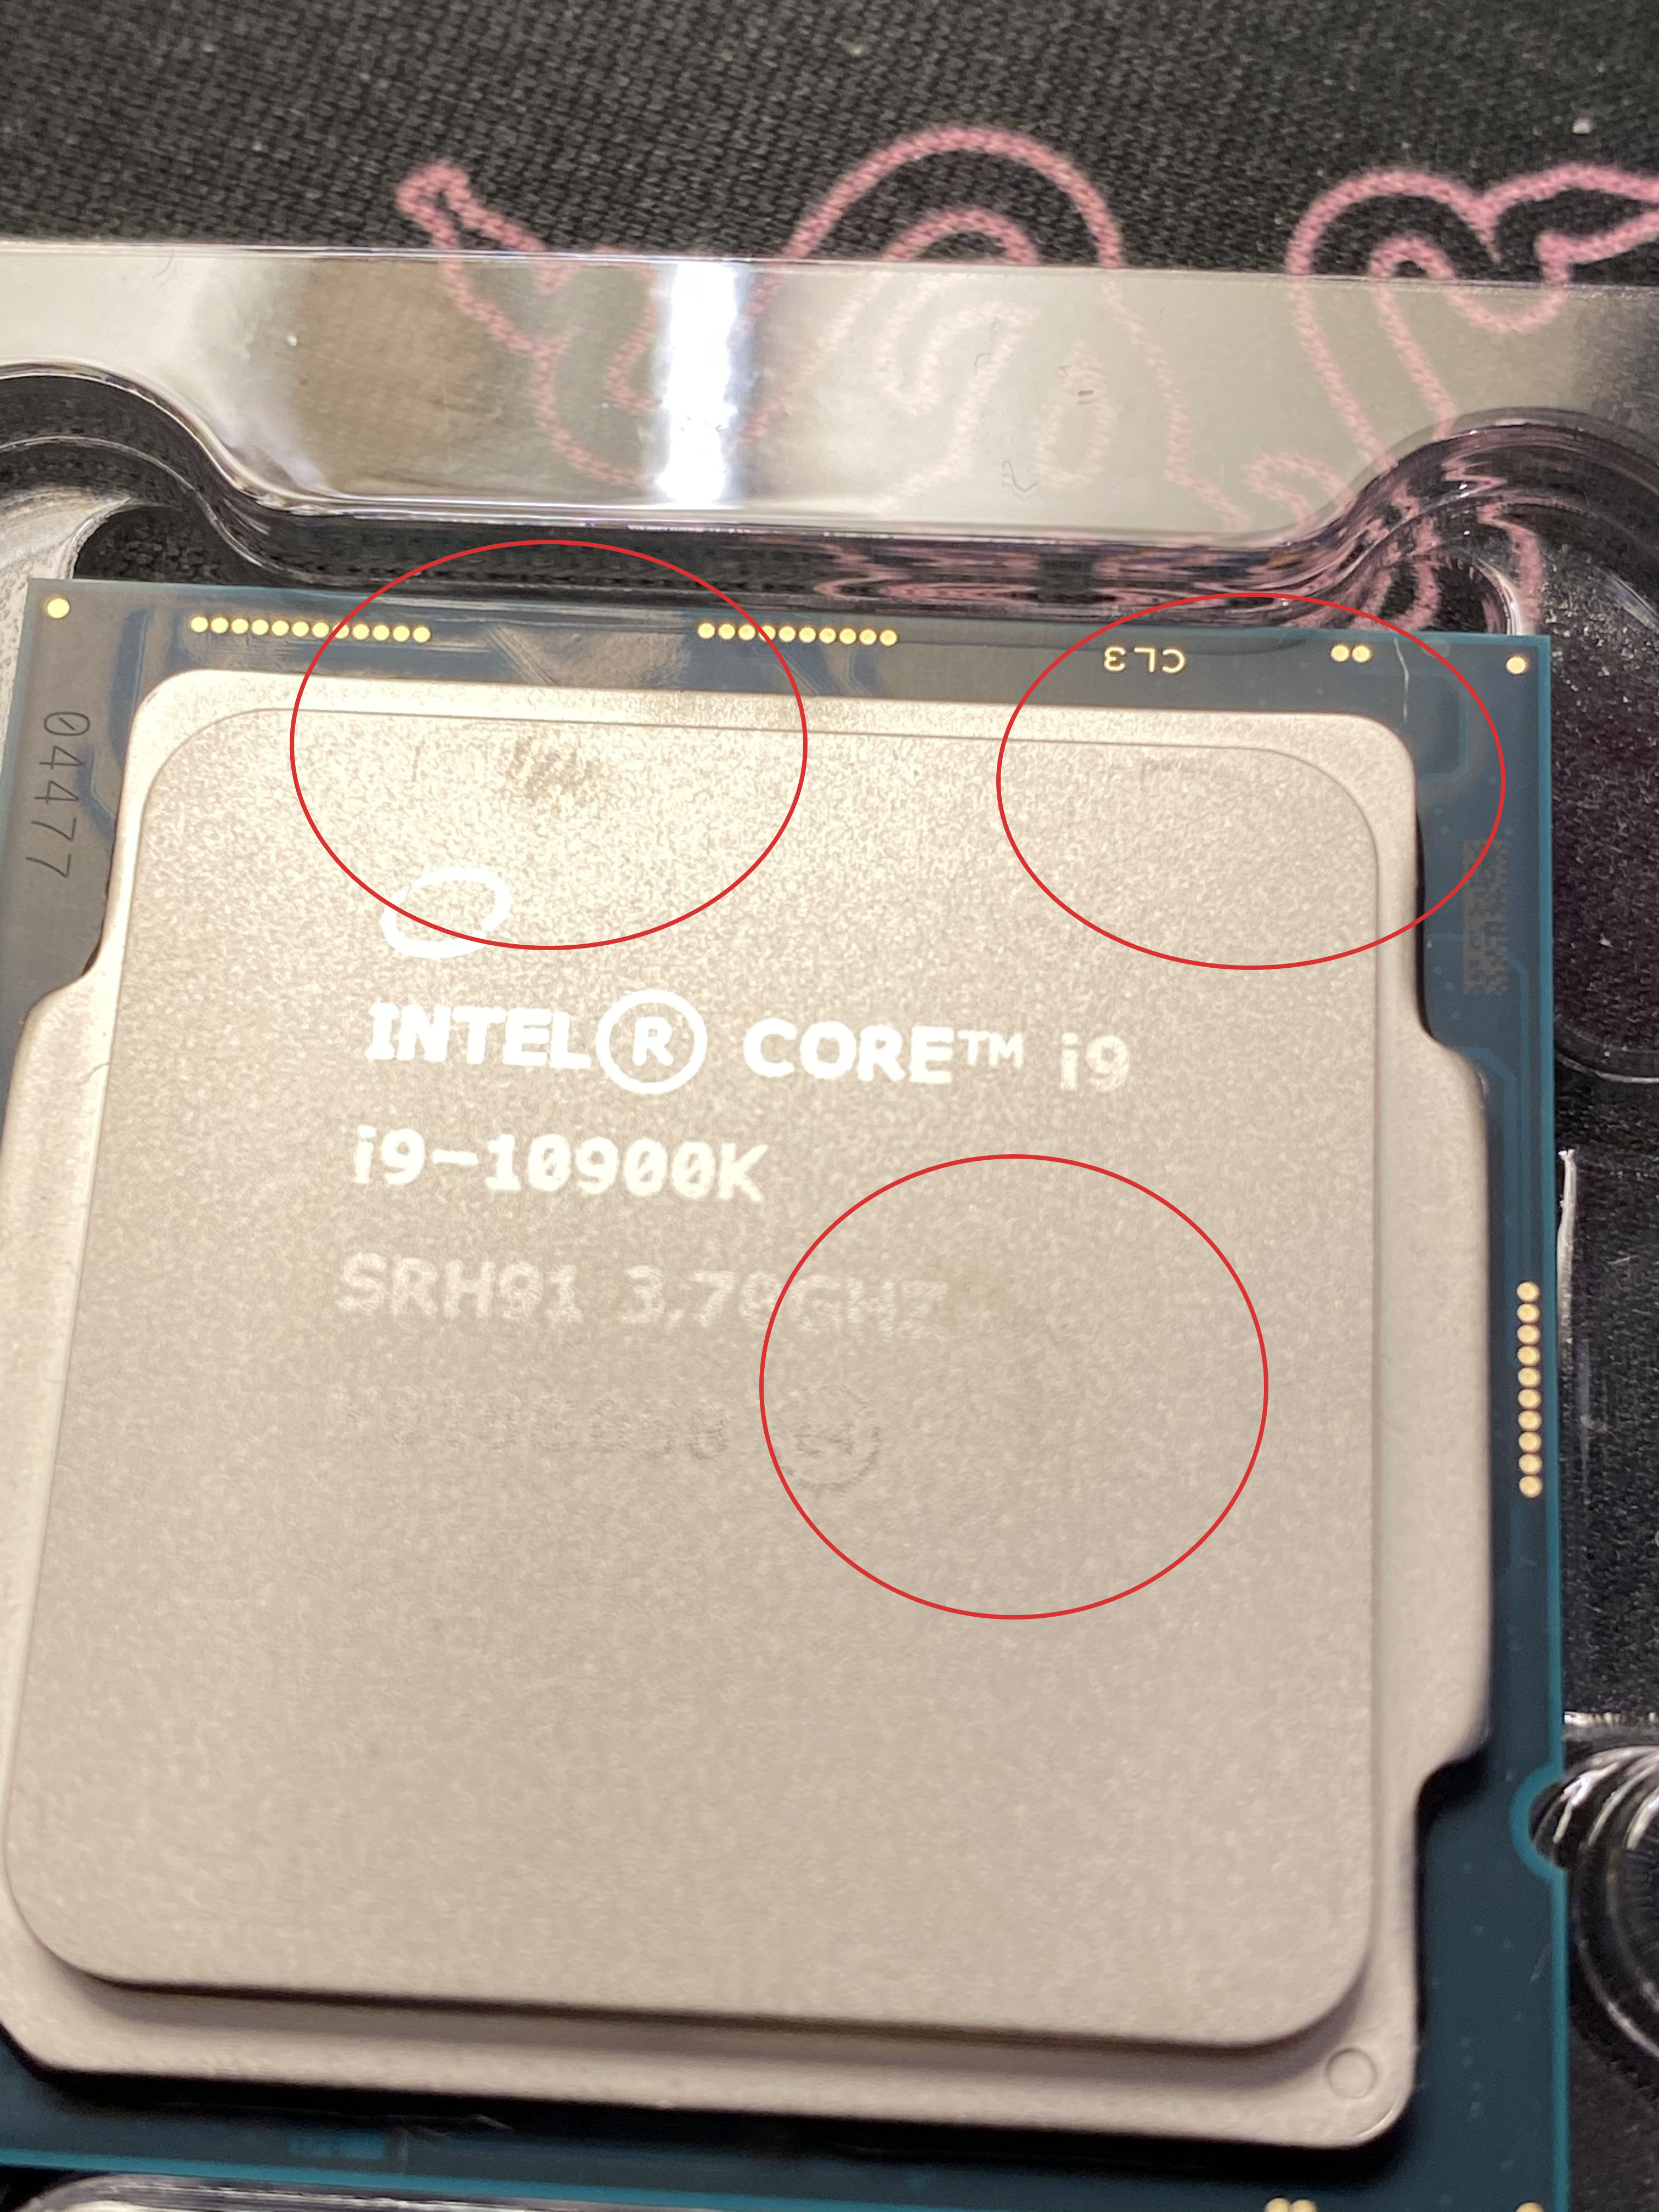 Marks on my new i10900k processor. Manufacturing or used signs? - Intel  Communities